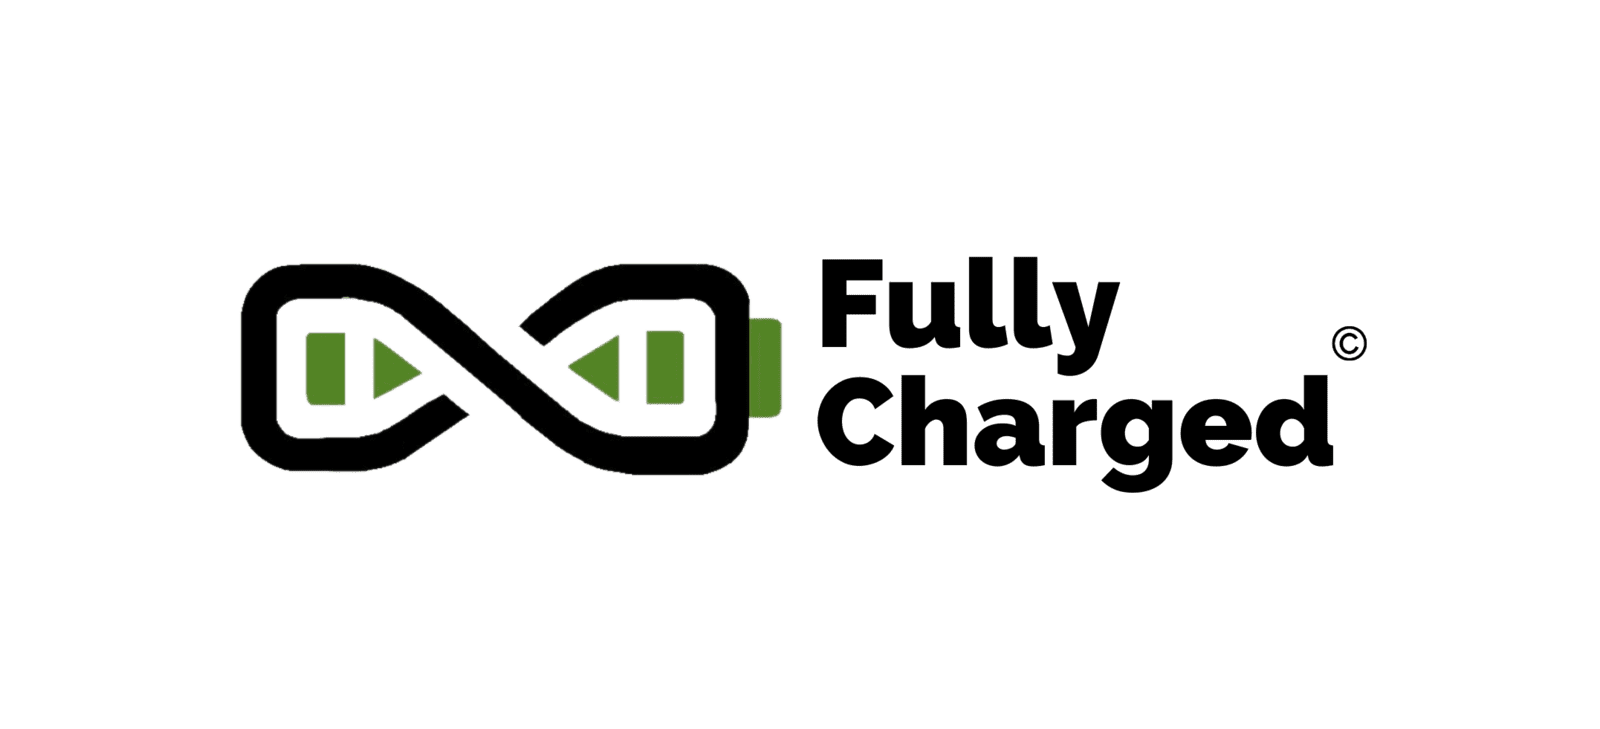 Fullycharged